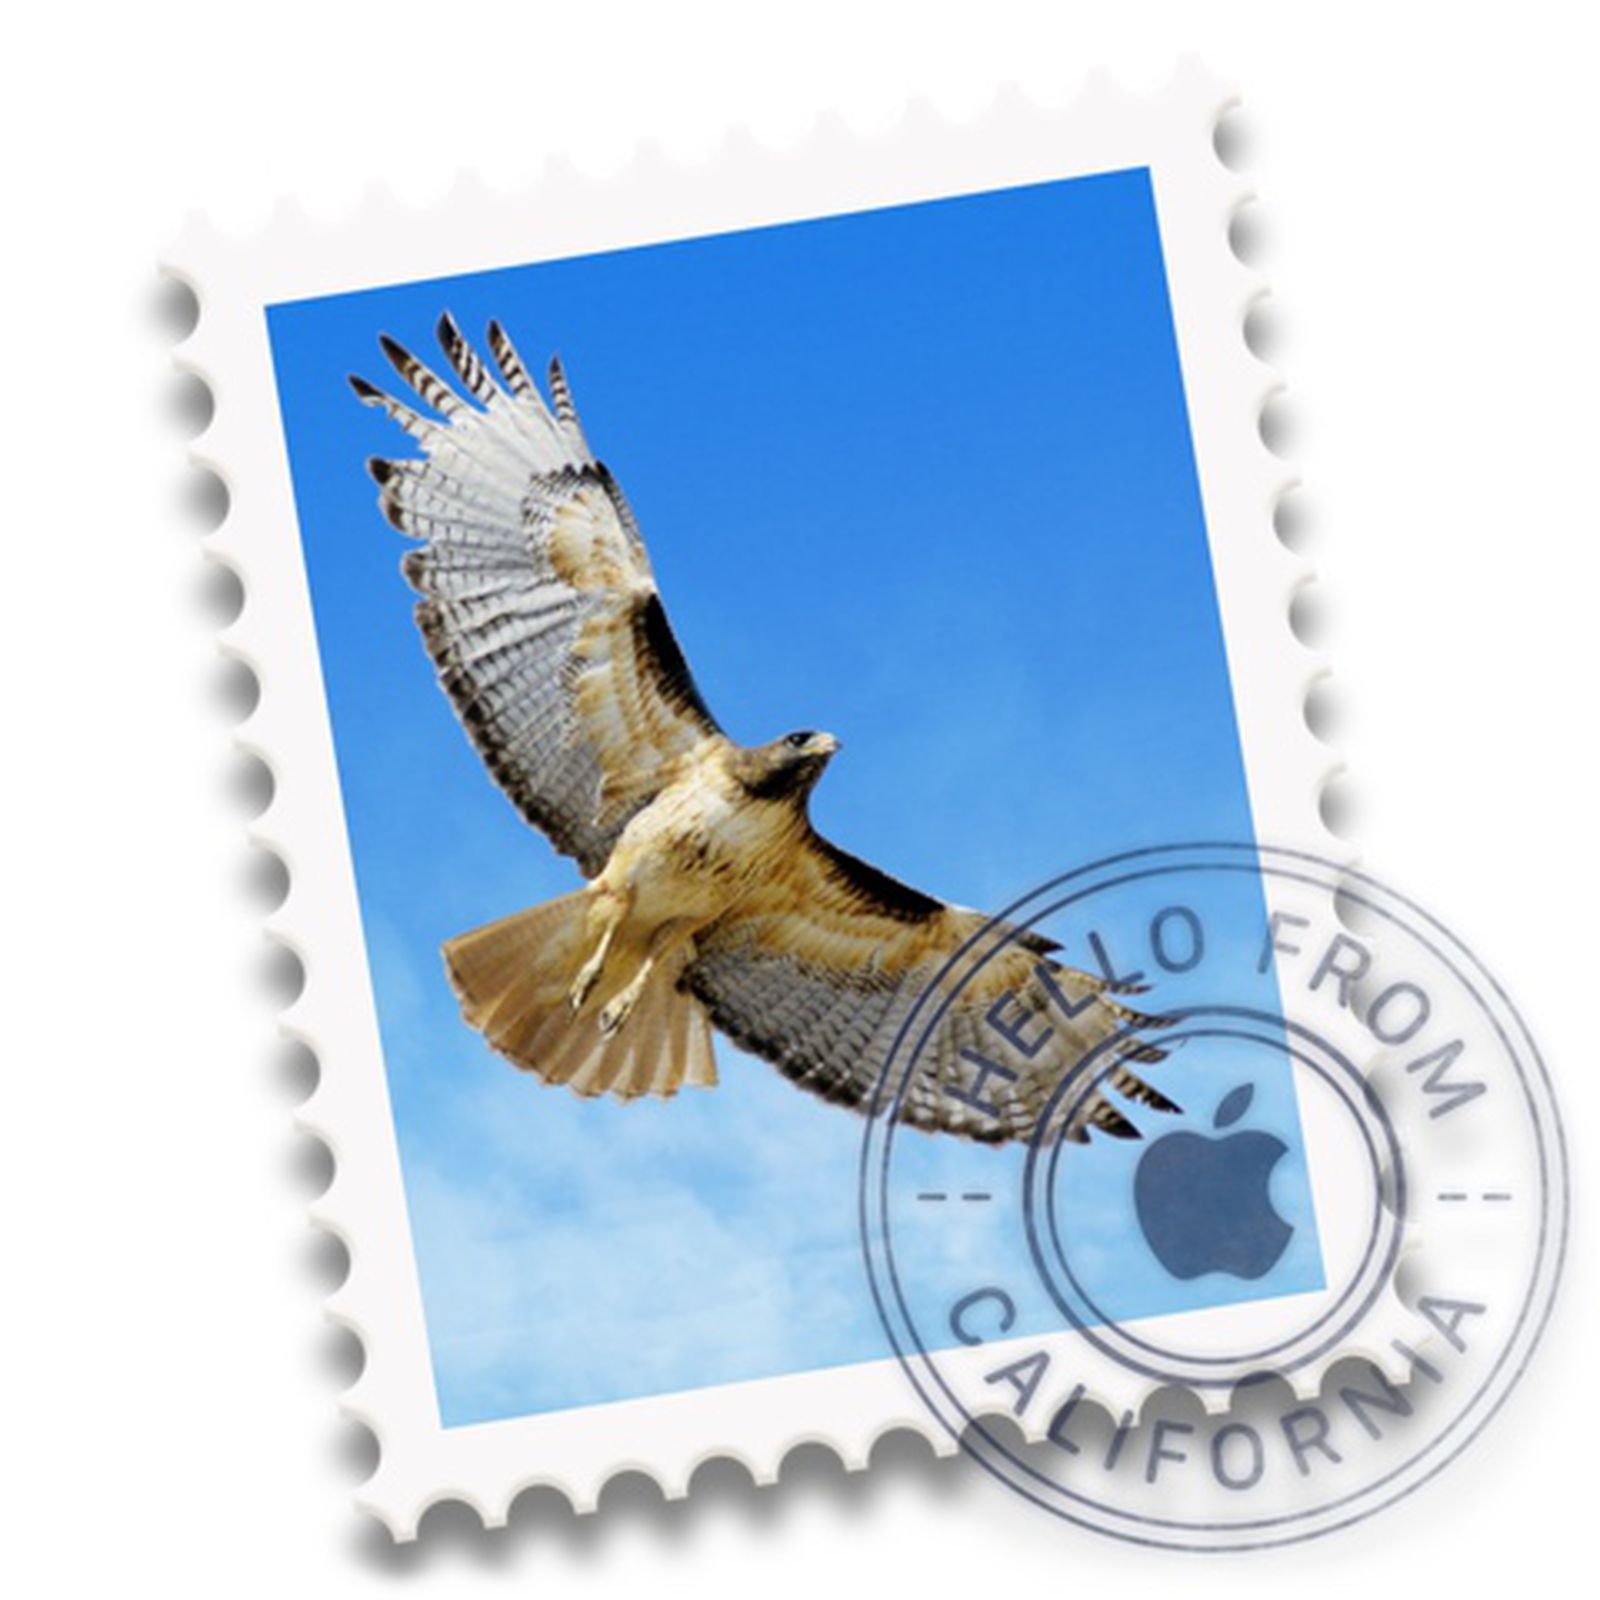 best email app for all emails mac